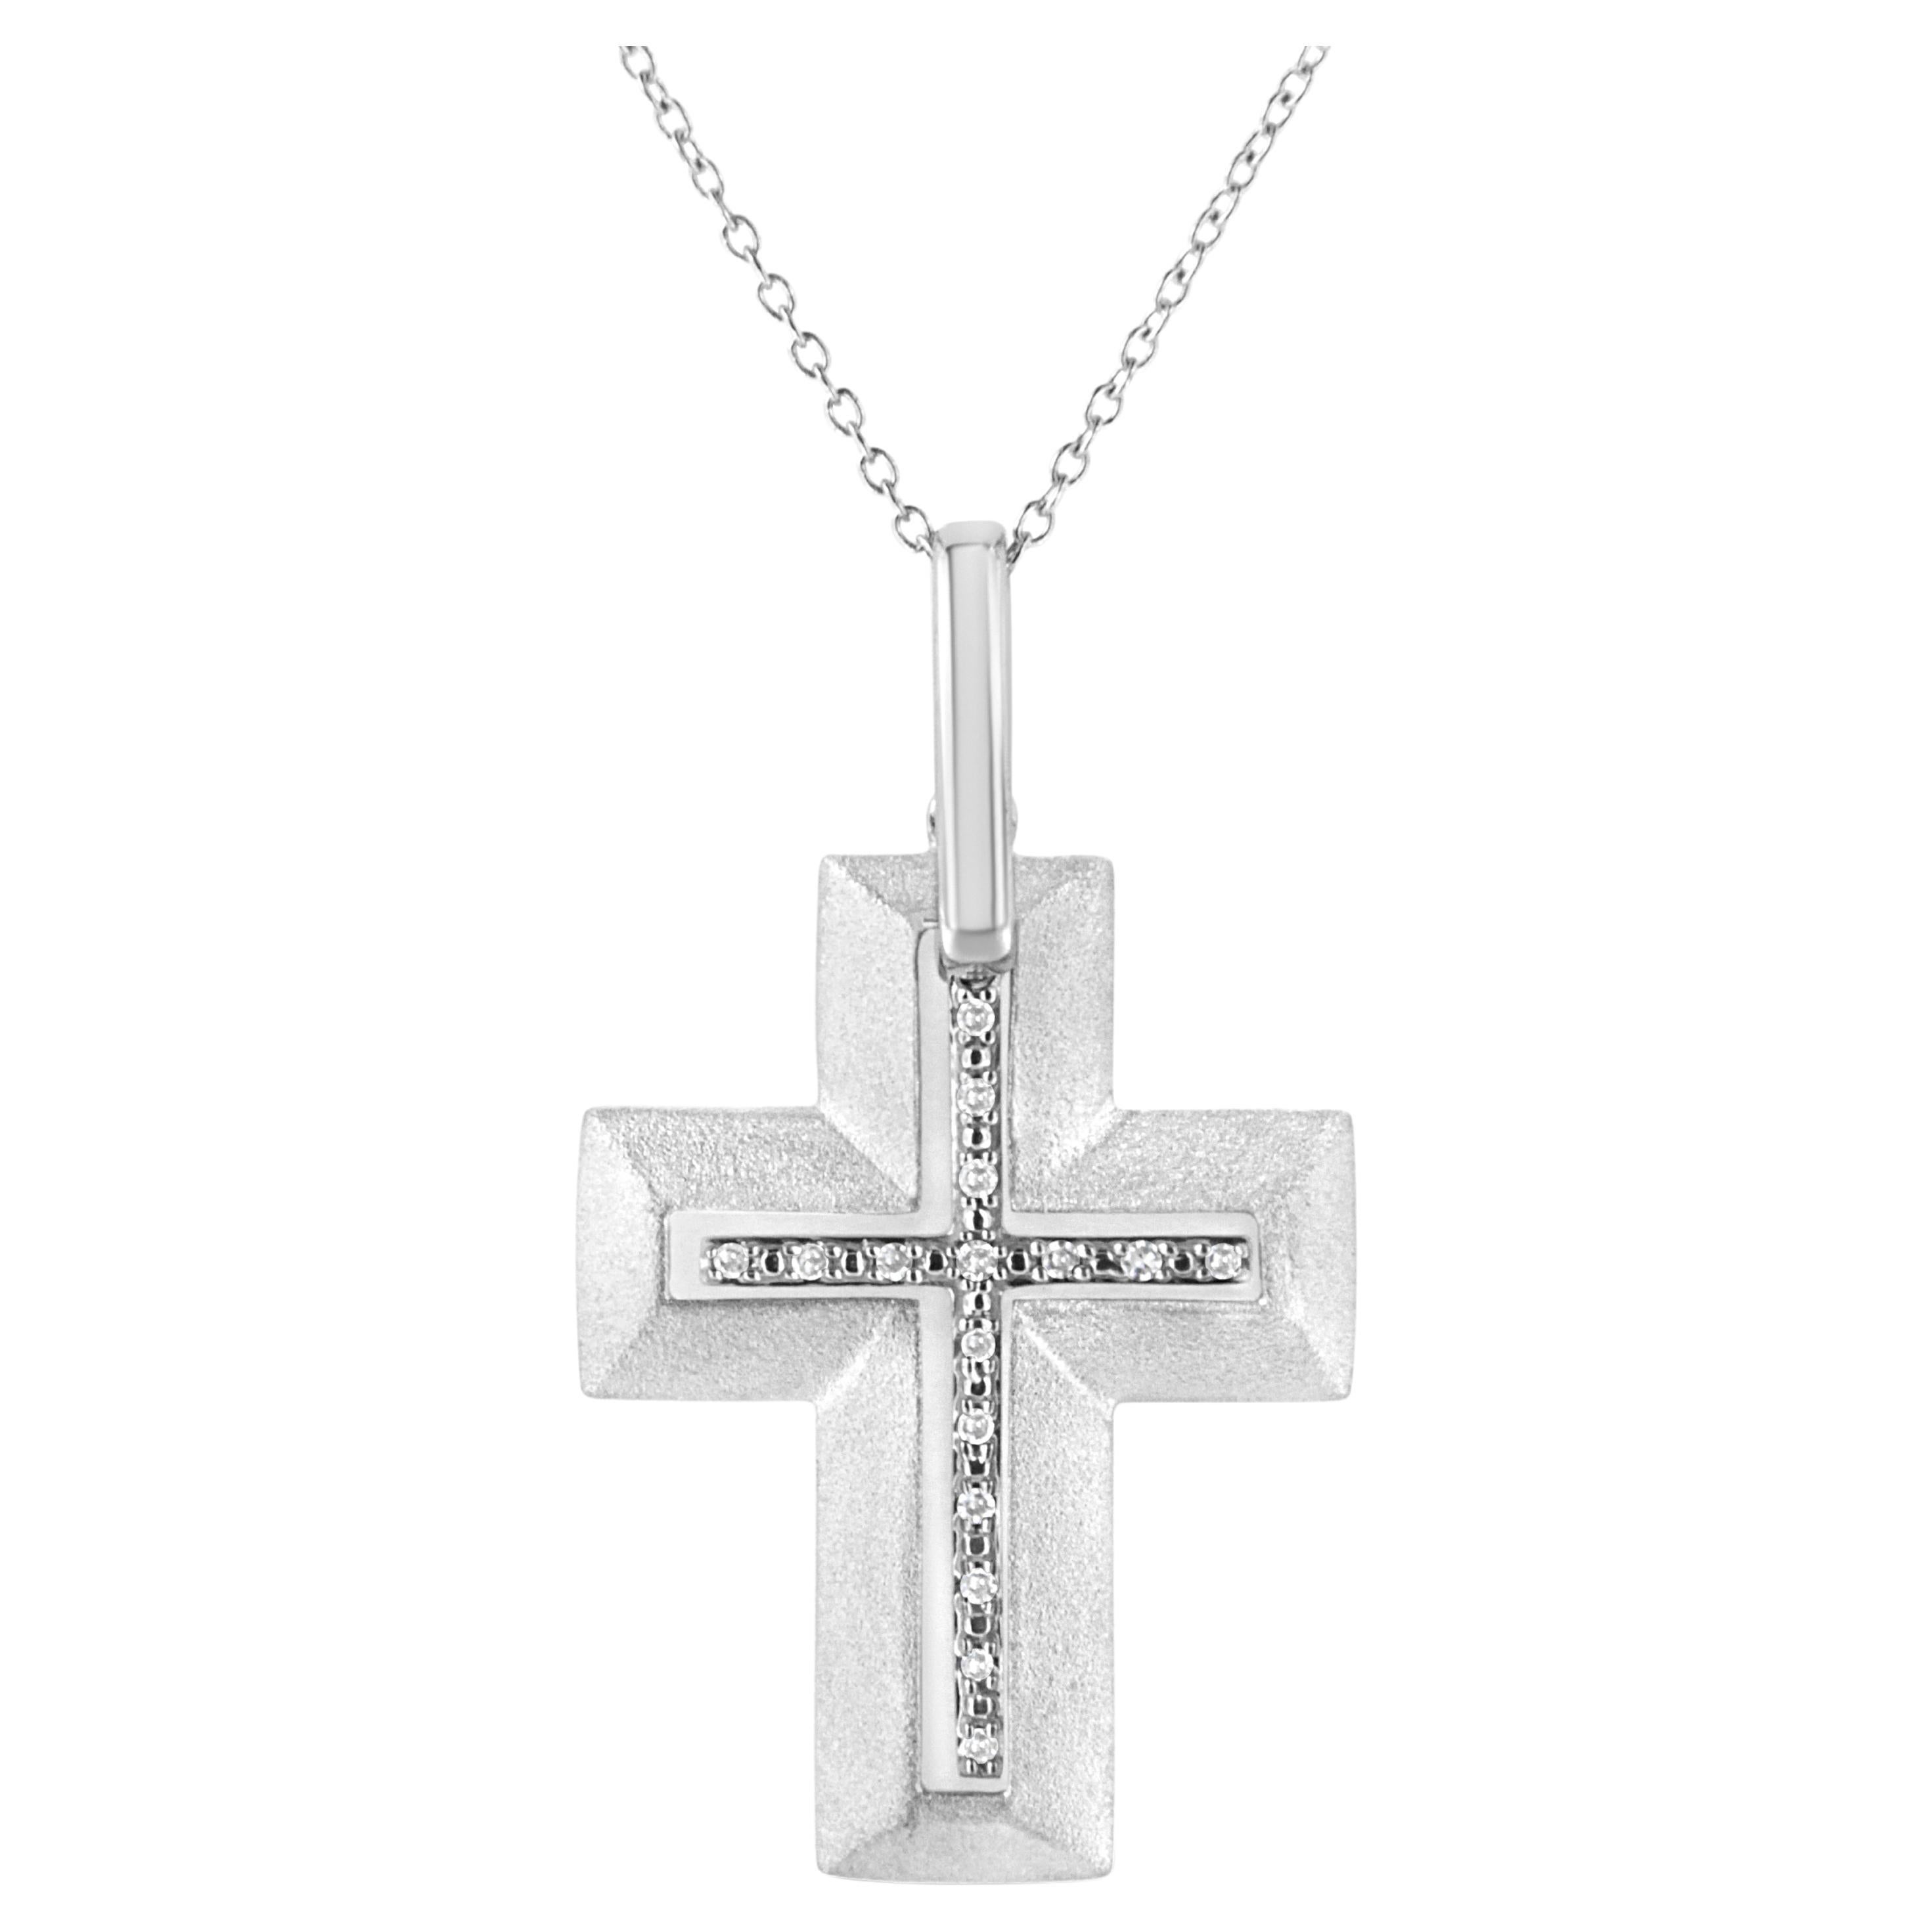 .925 Sterling Silver Prong-Set Diamond Accent Bold Cross Pendant Necklace